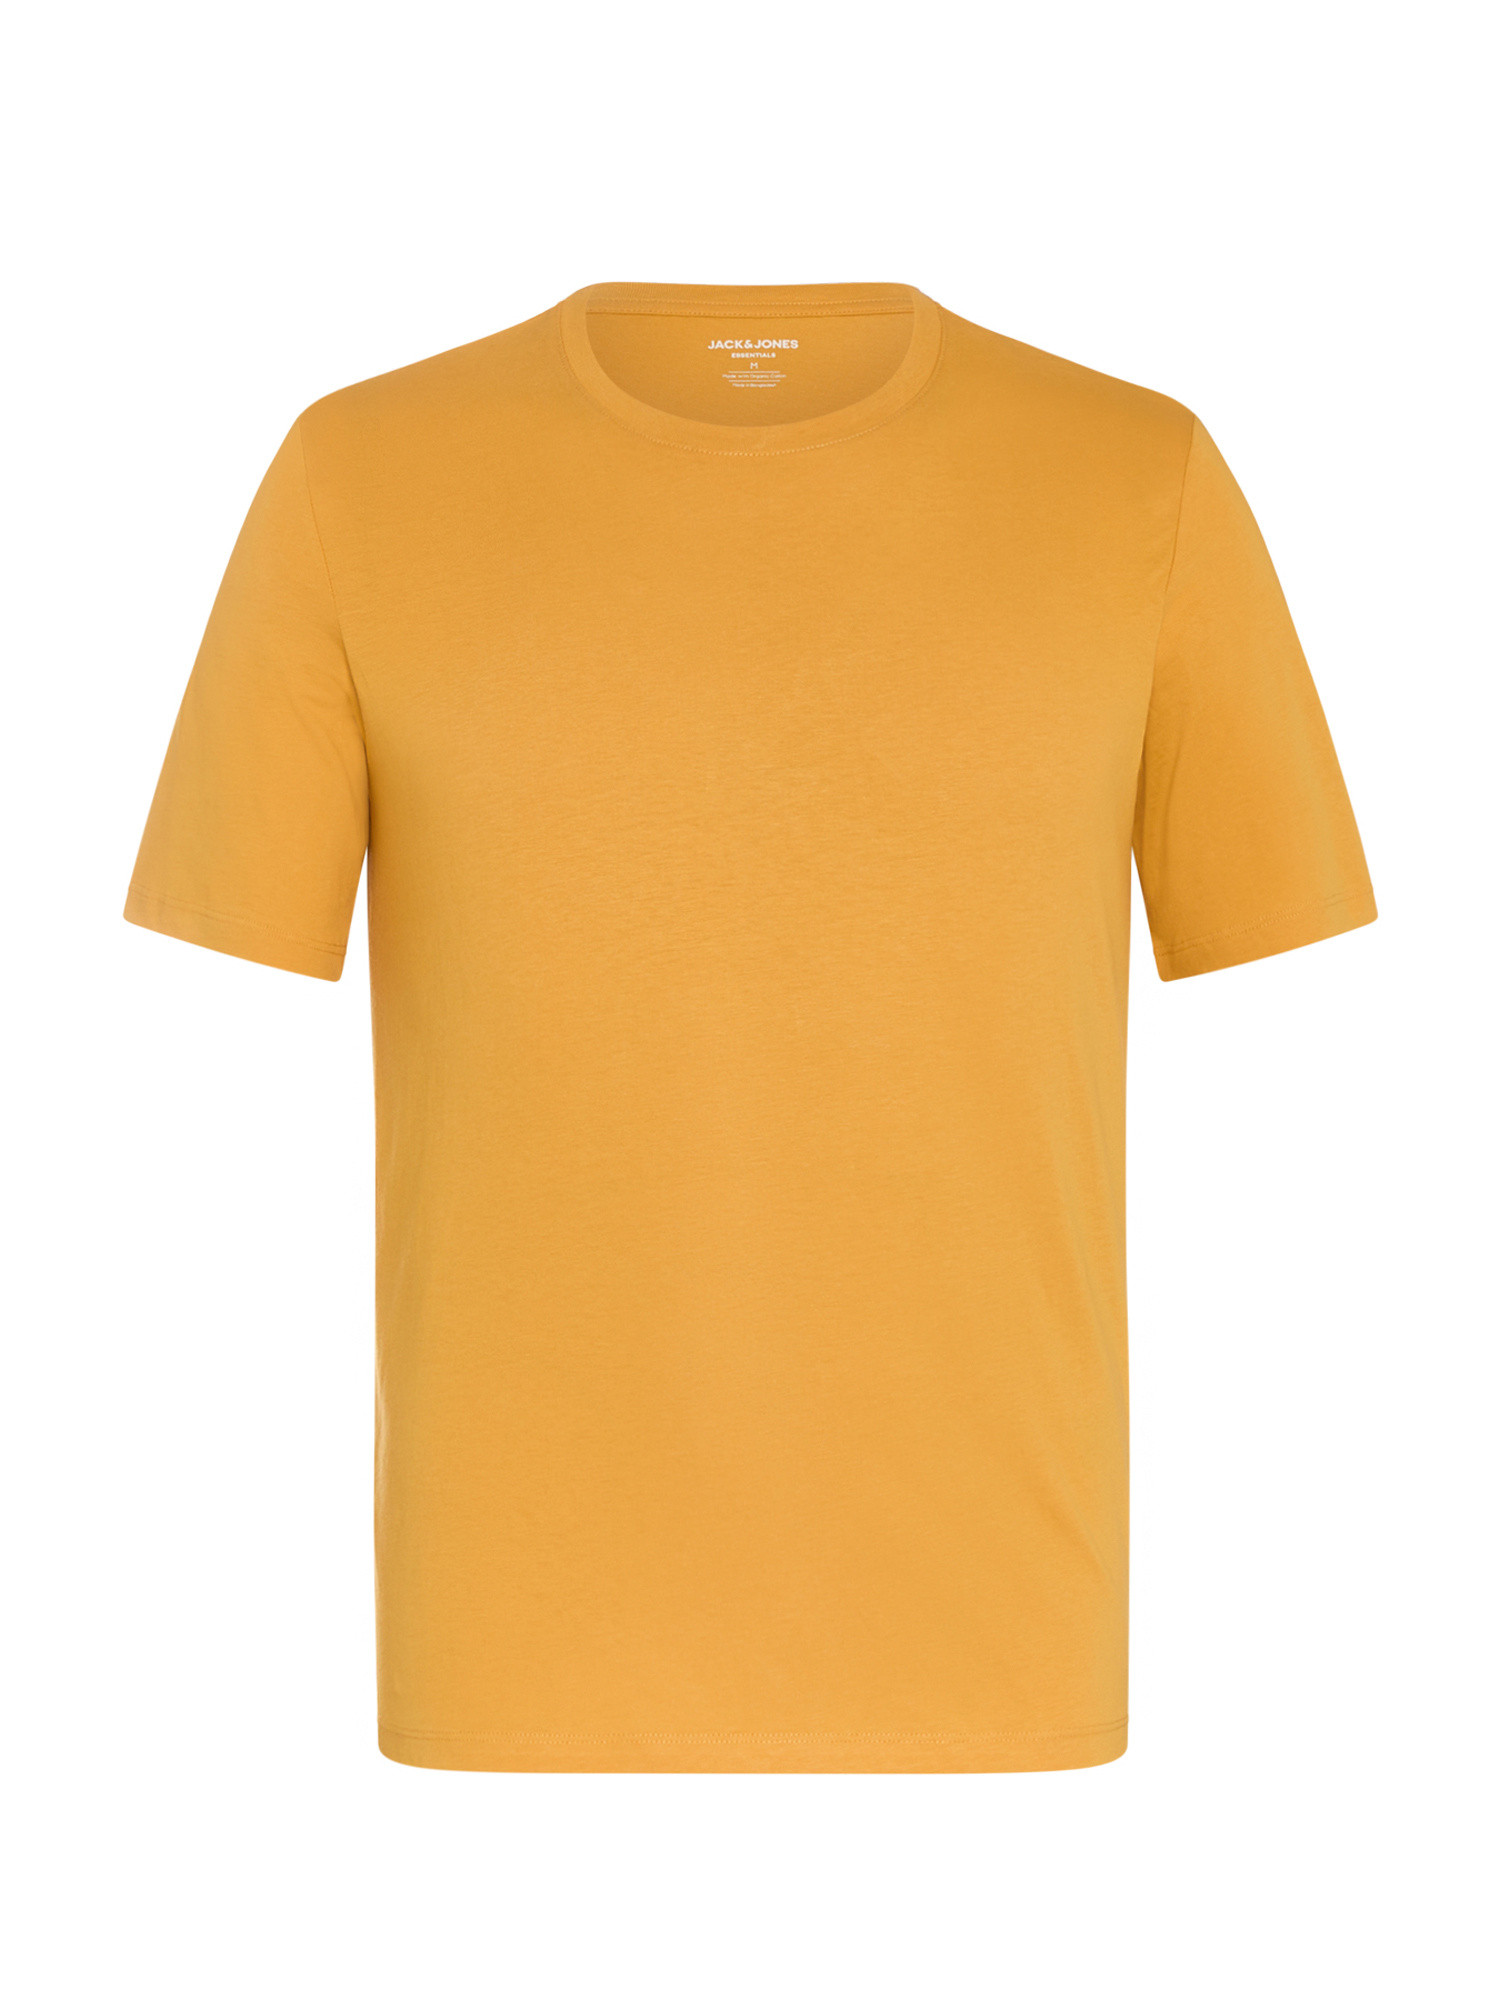 Jack & Jones - T-shirt in cotone, Giallo, large image number 0